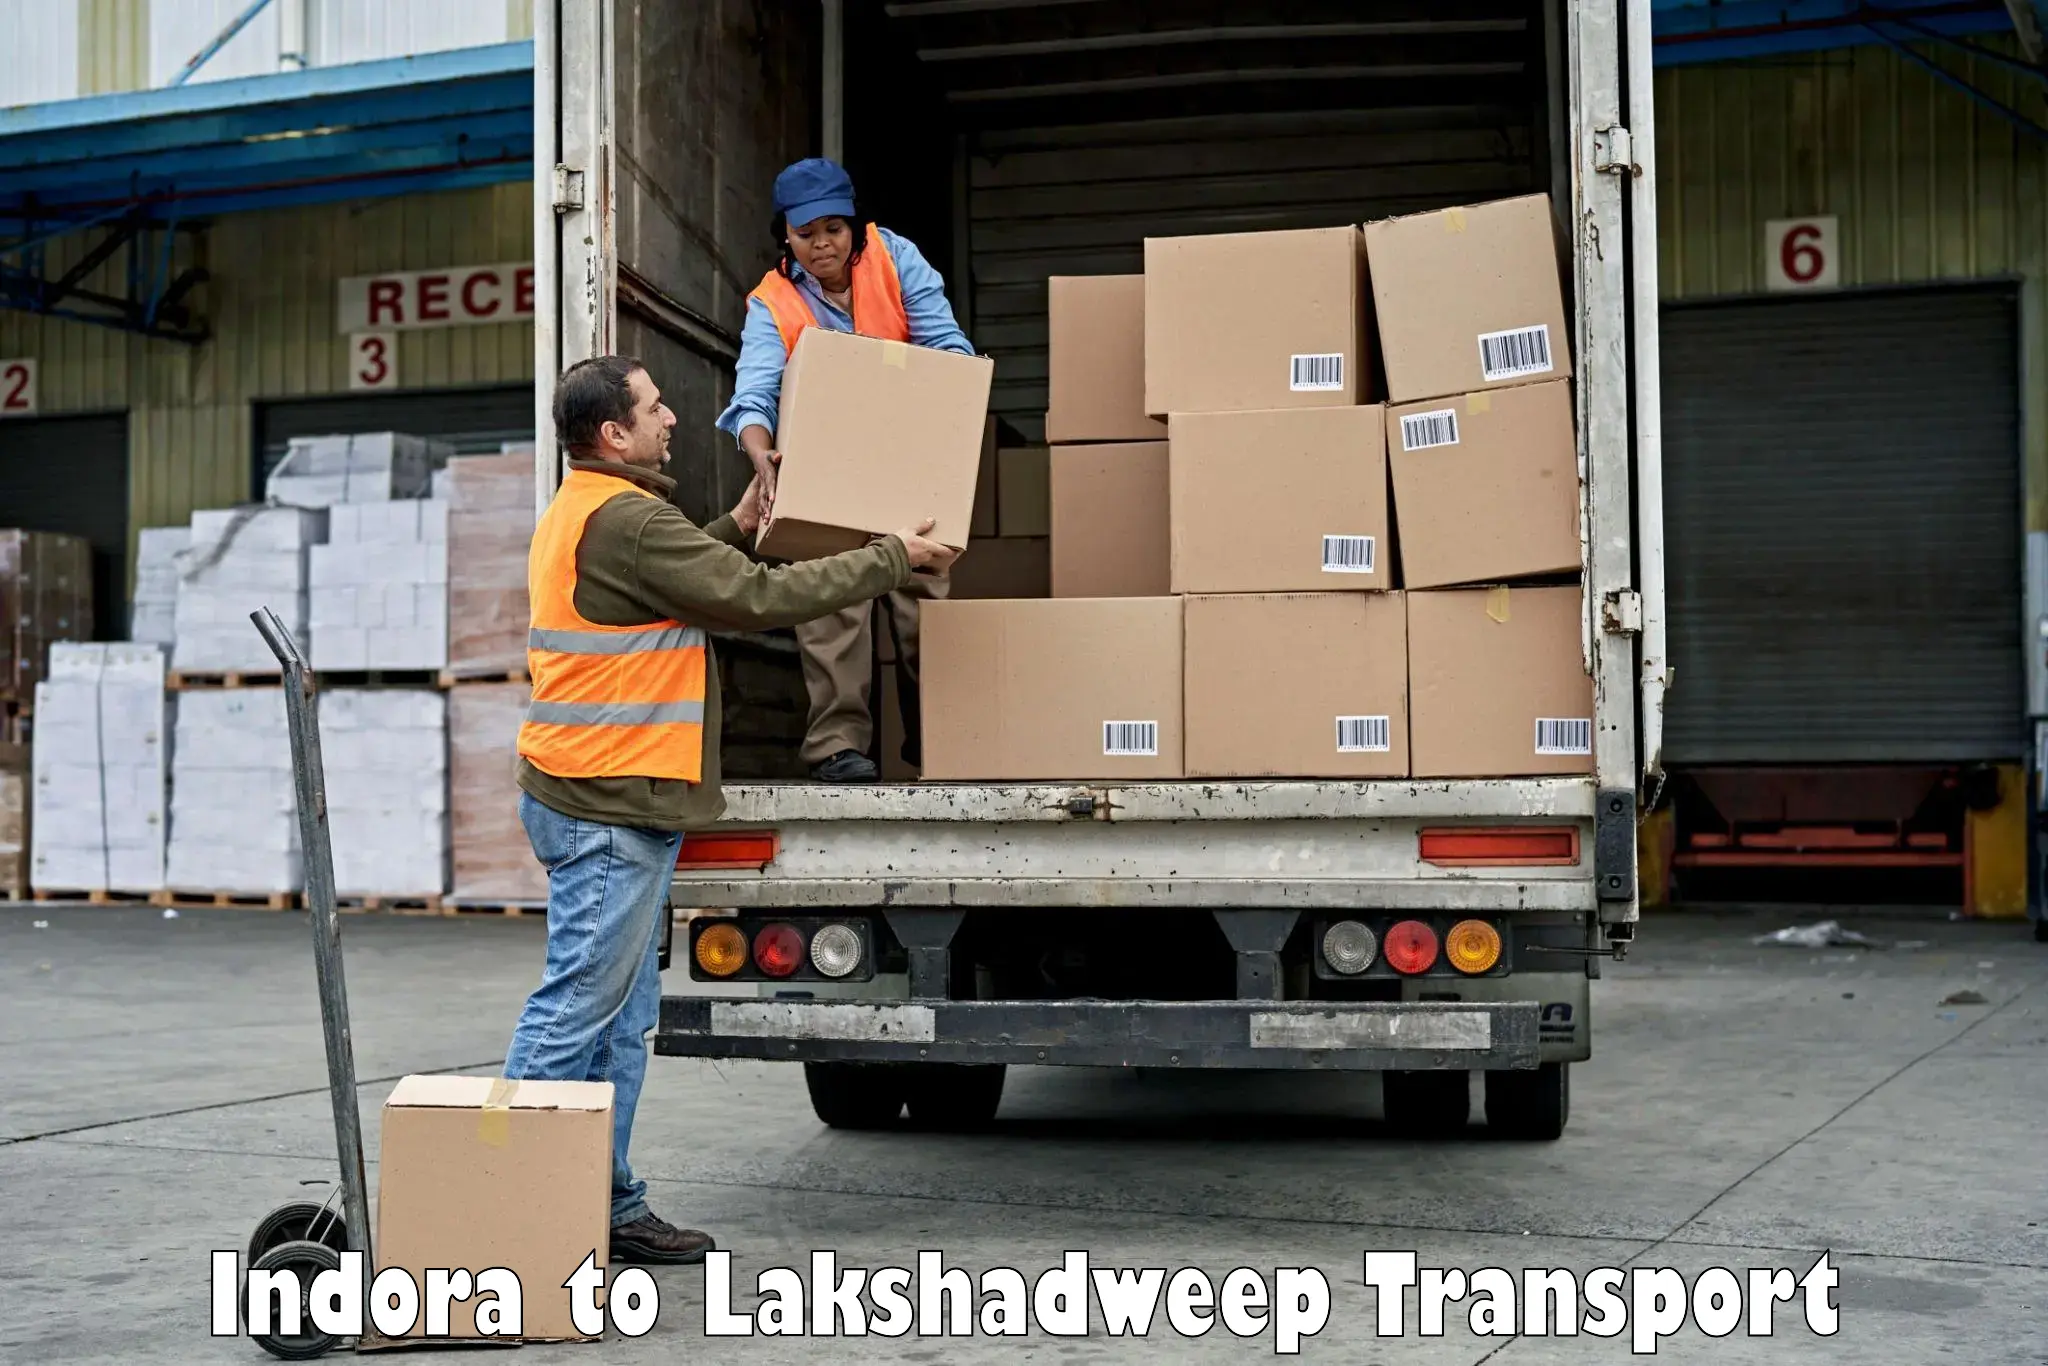 Truck transport companies in India Indora to Lakshadweep